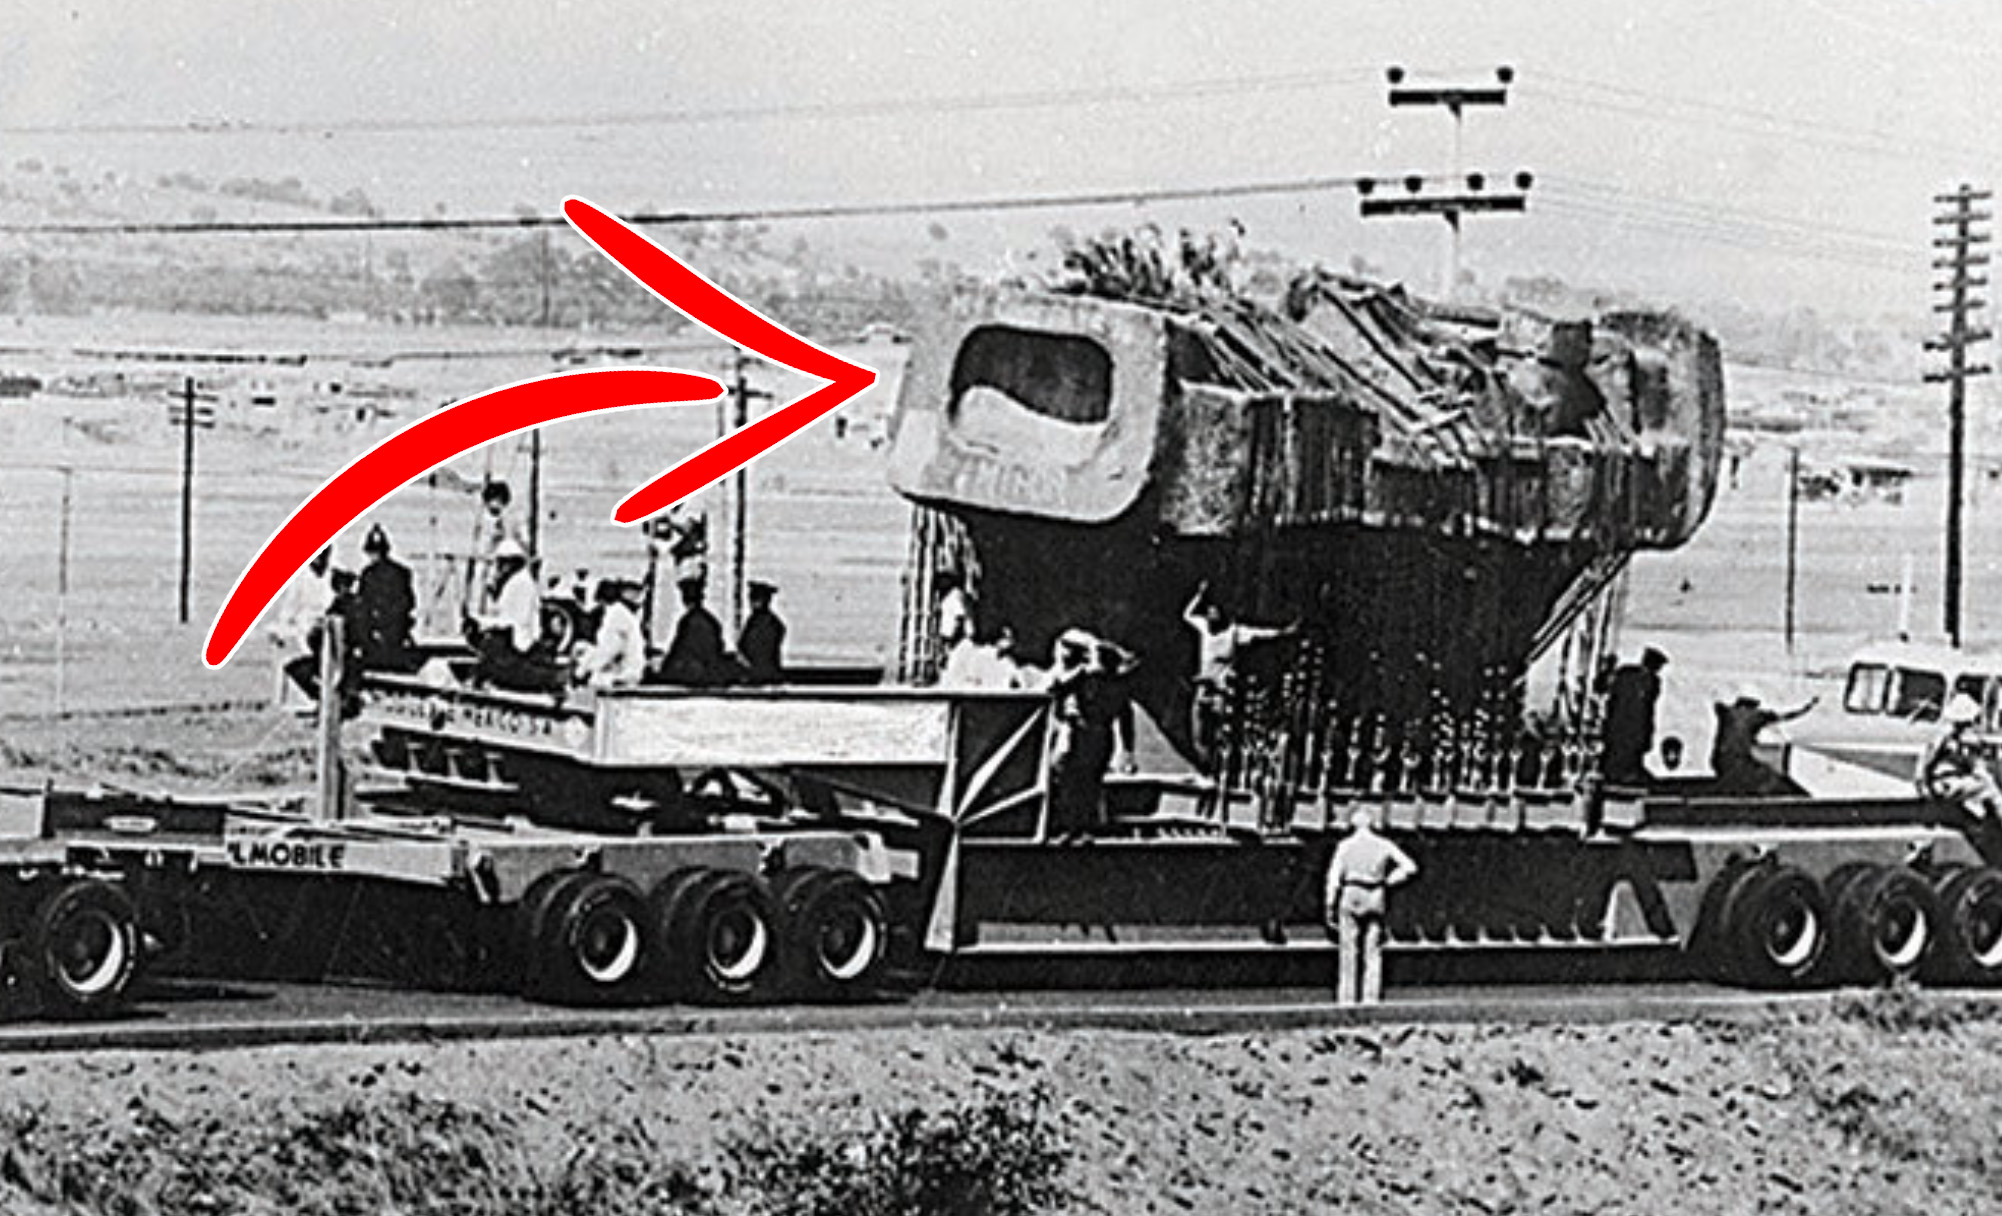 A photograph showing how the monolith of Tlaloc was transported in modern times.